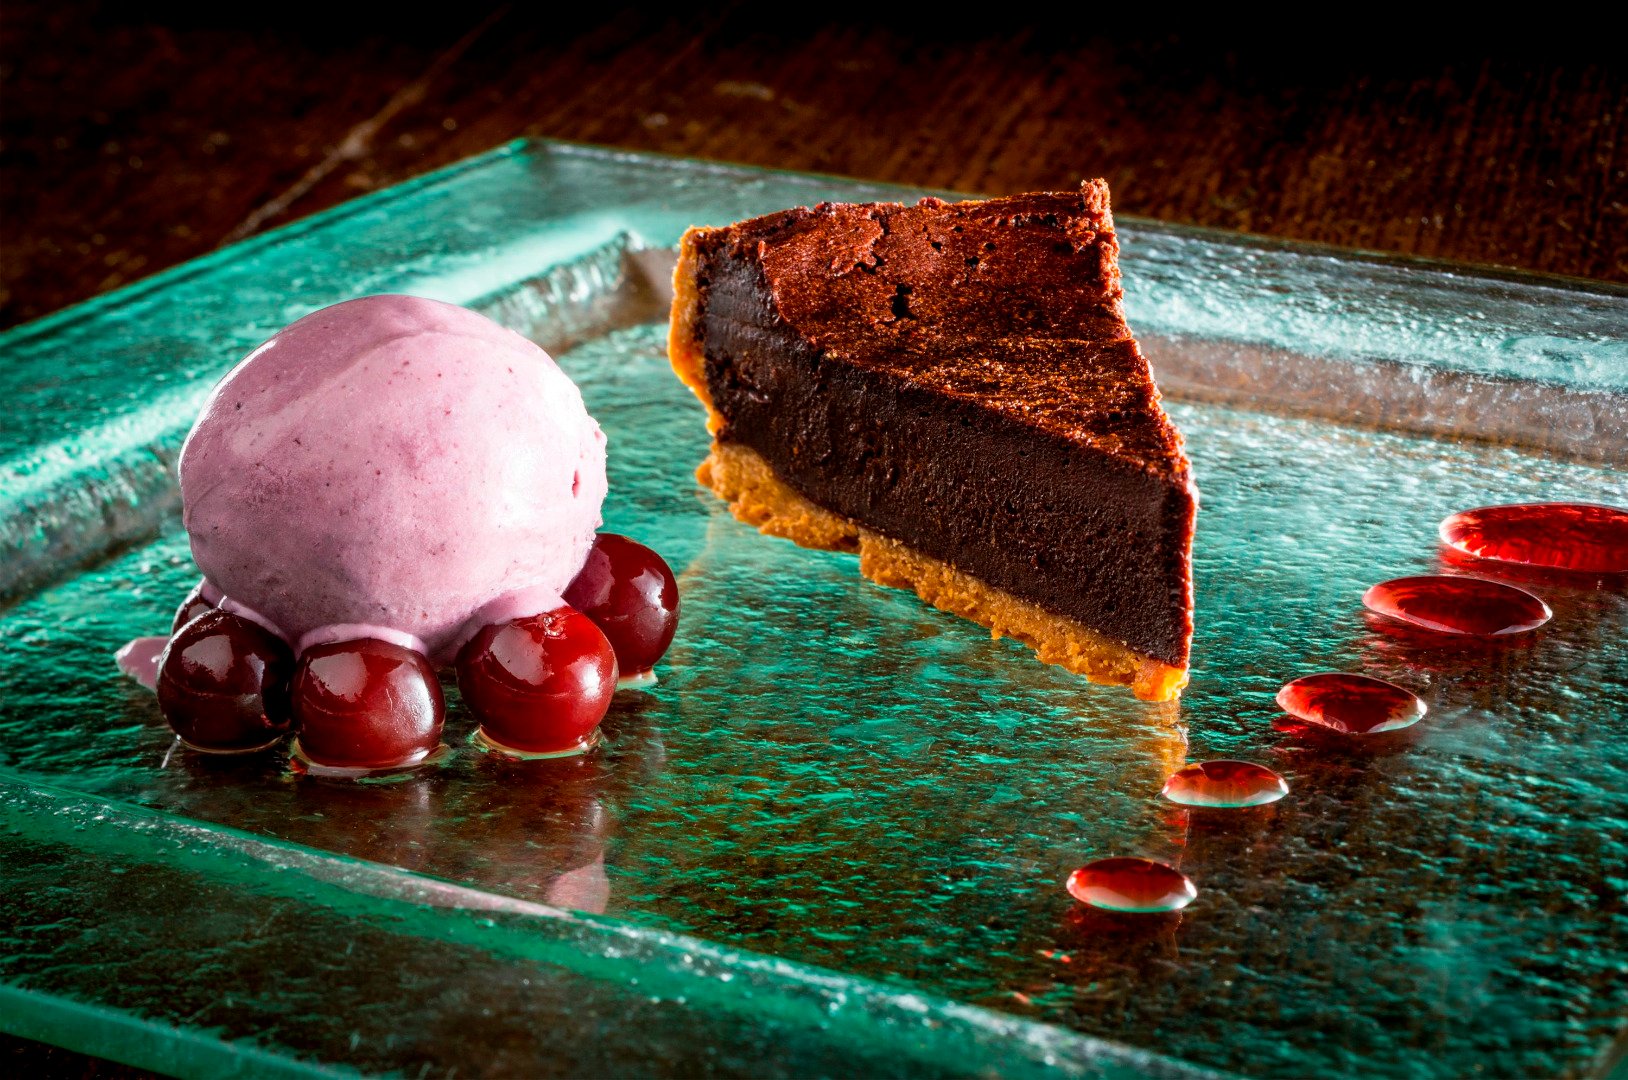 Image name homemade chocolate tart with cherry ice cream cherries the blue lion inn east witton the good pub guide inn of the year 20141 the 8 image from the post Eating out in the Yorkshire Dales in Yorkshire.com.